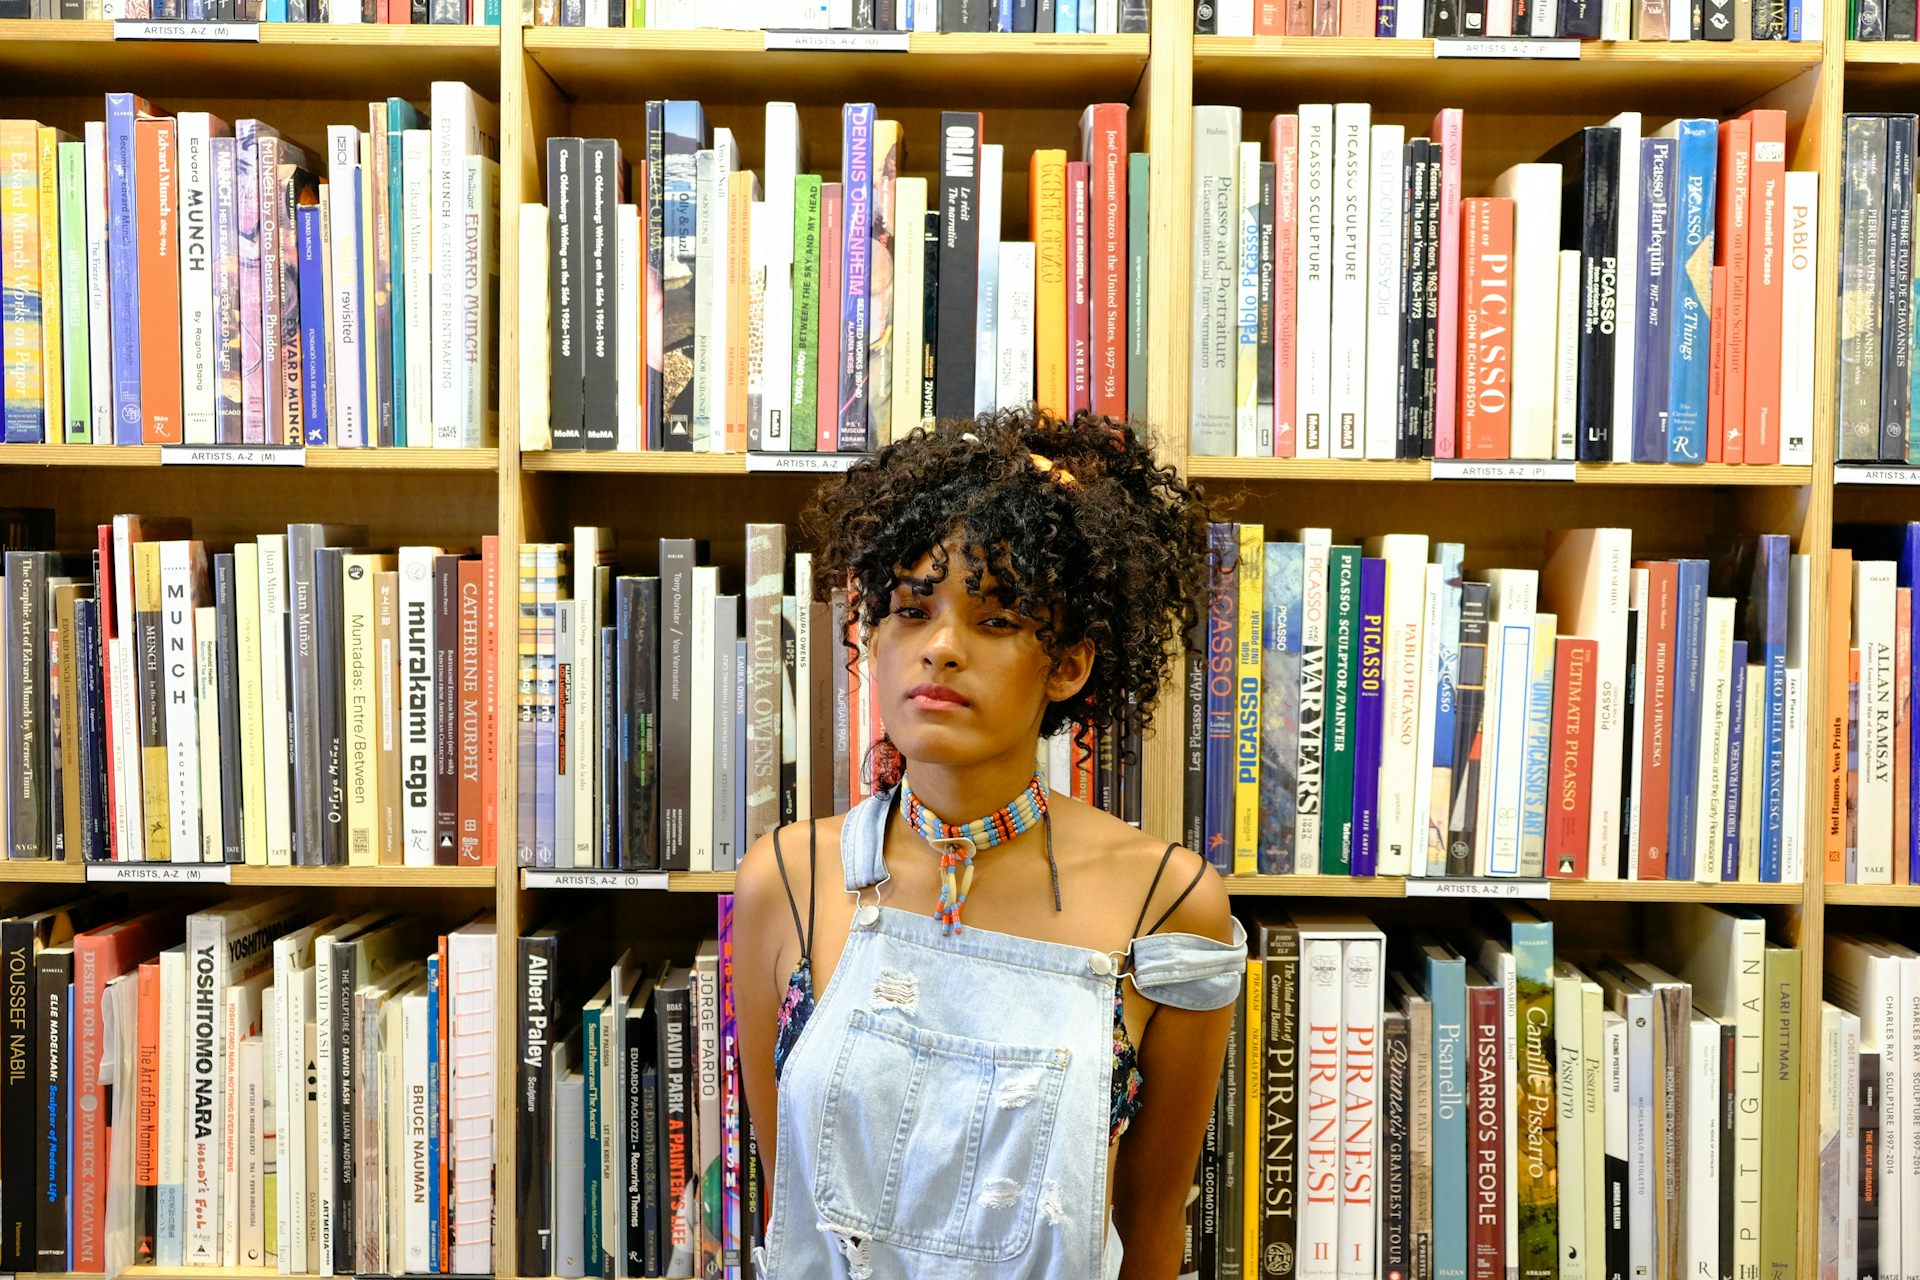 A youth in front of a bookshelf wearing overalls.